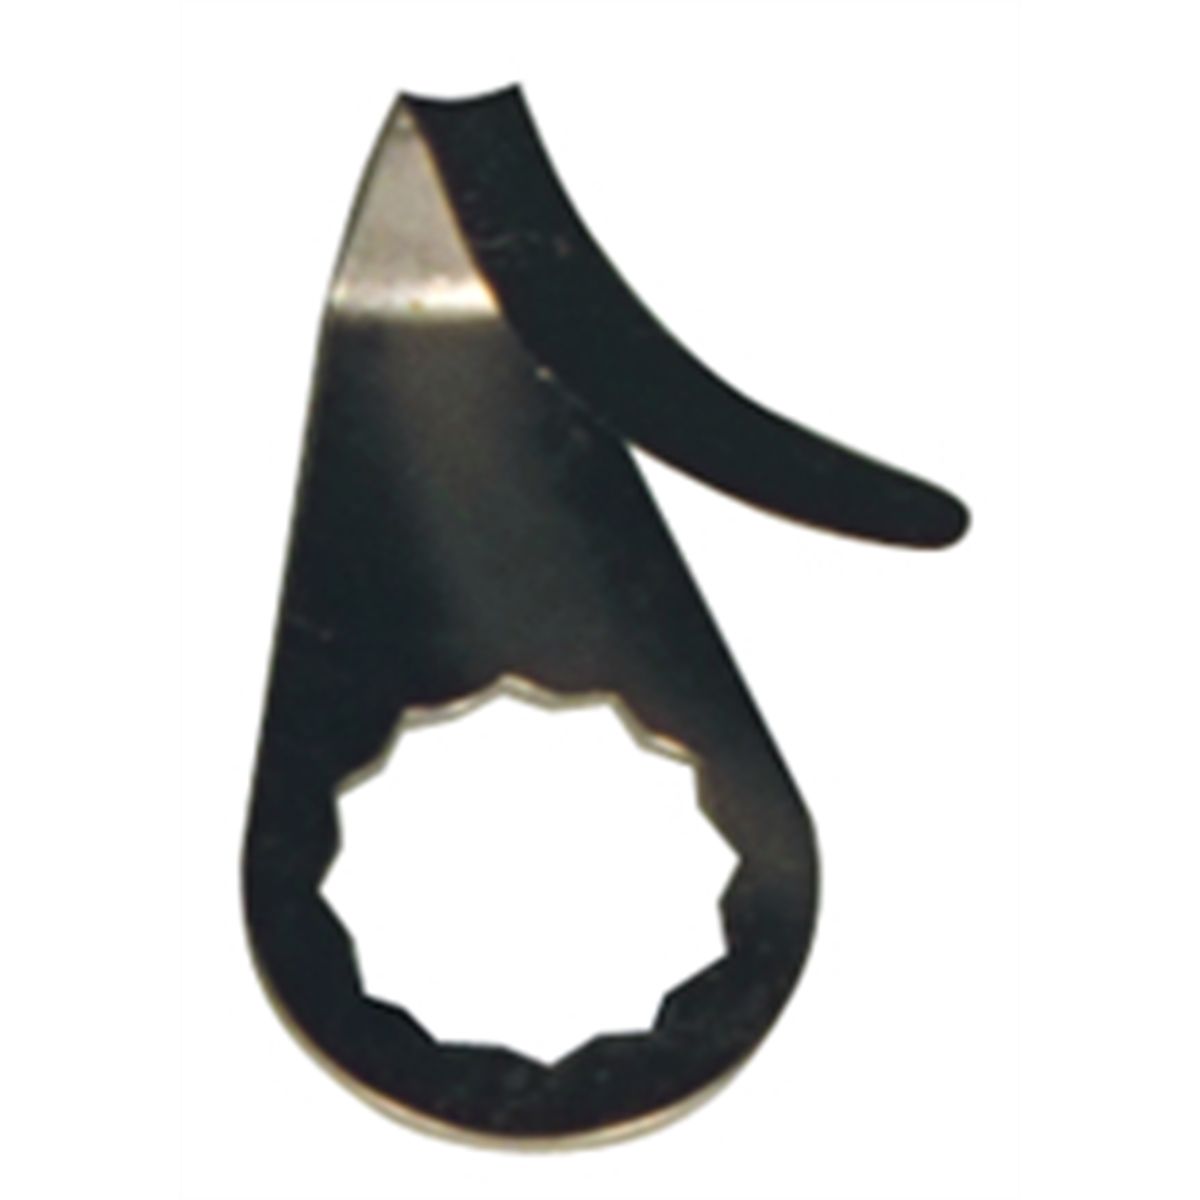 Windshield Knife Replacement Hook Blade for WINDK - 36mm